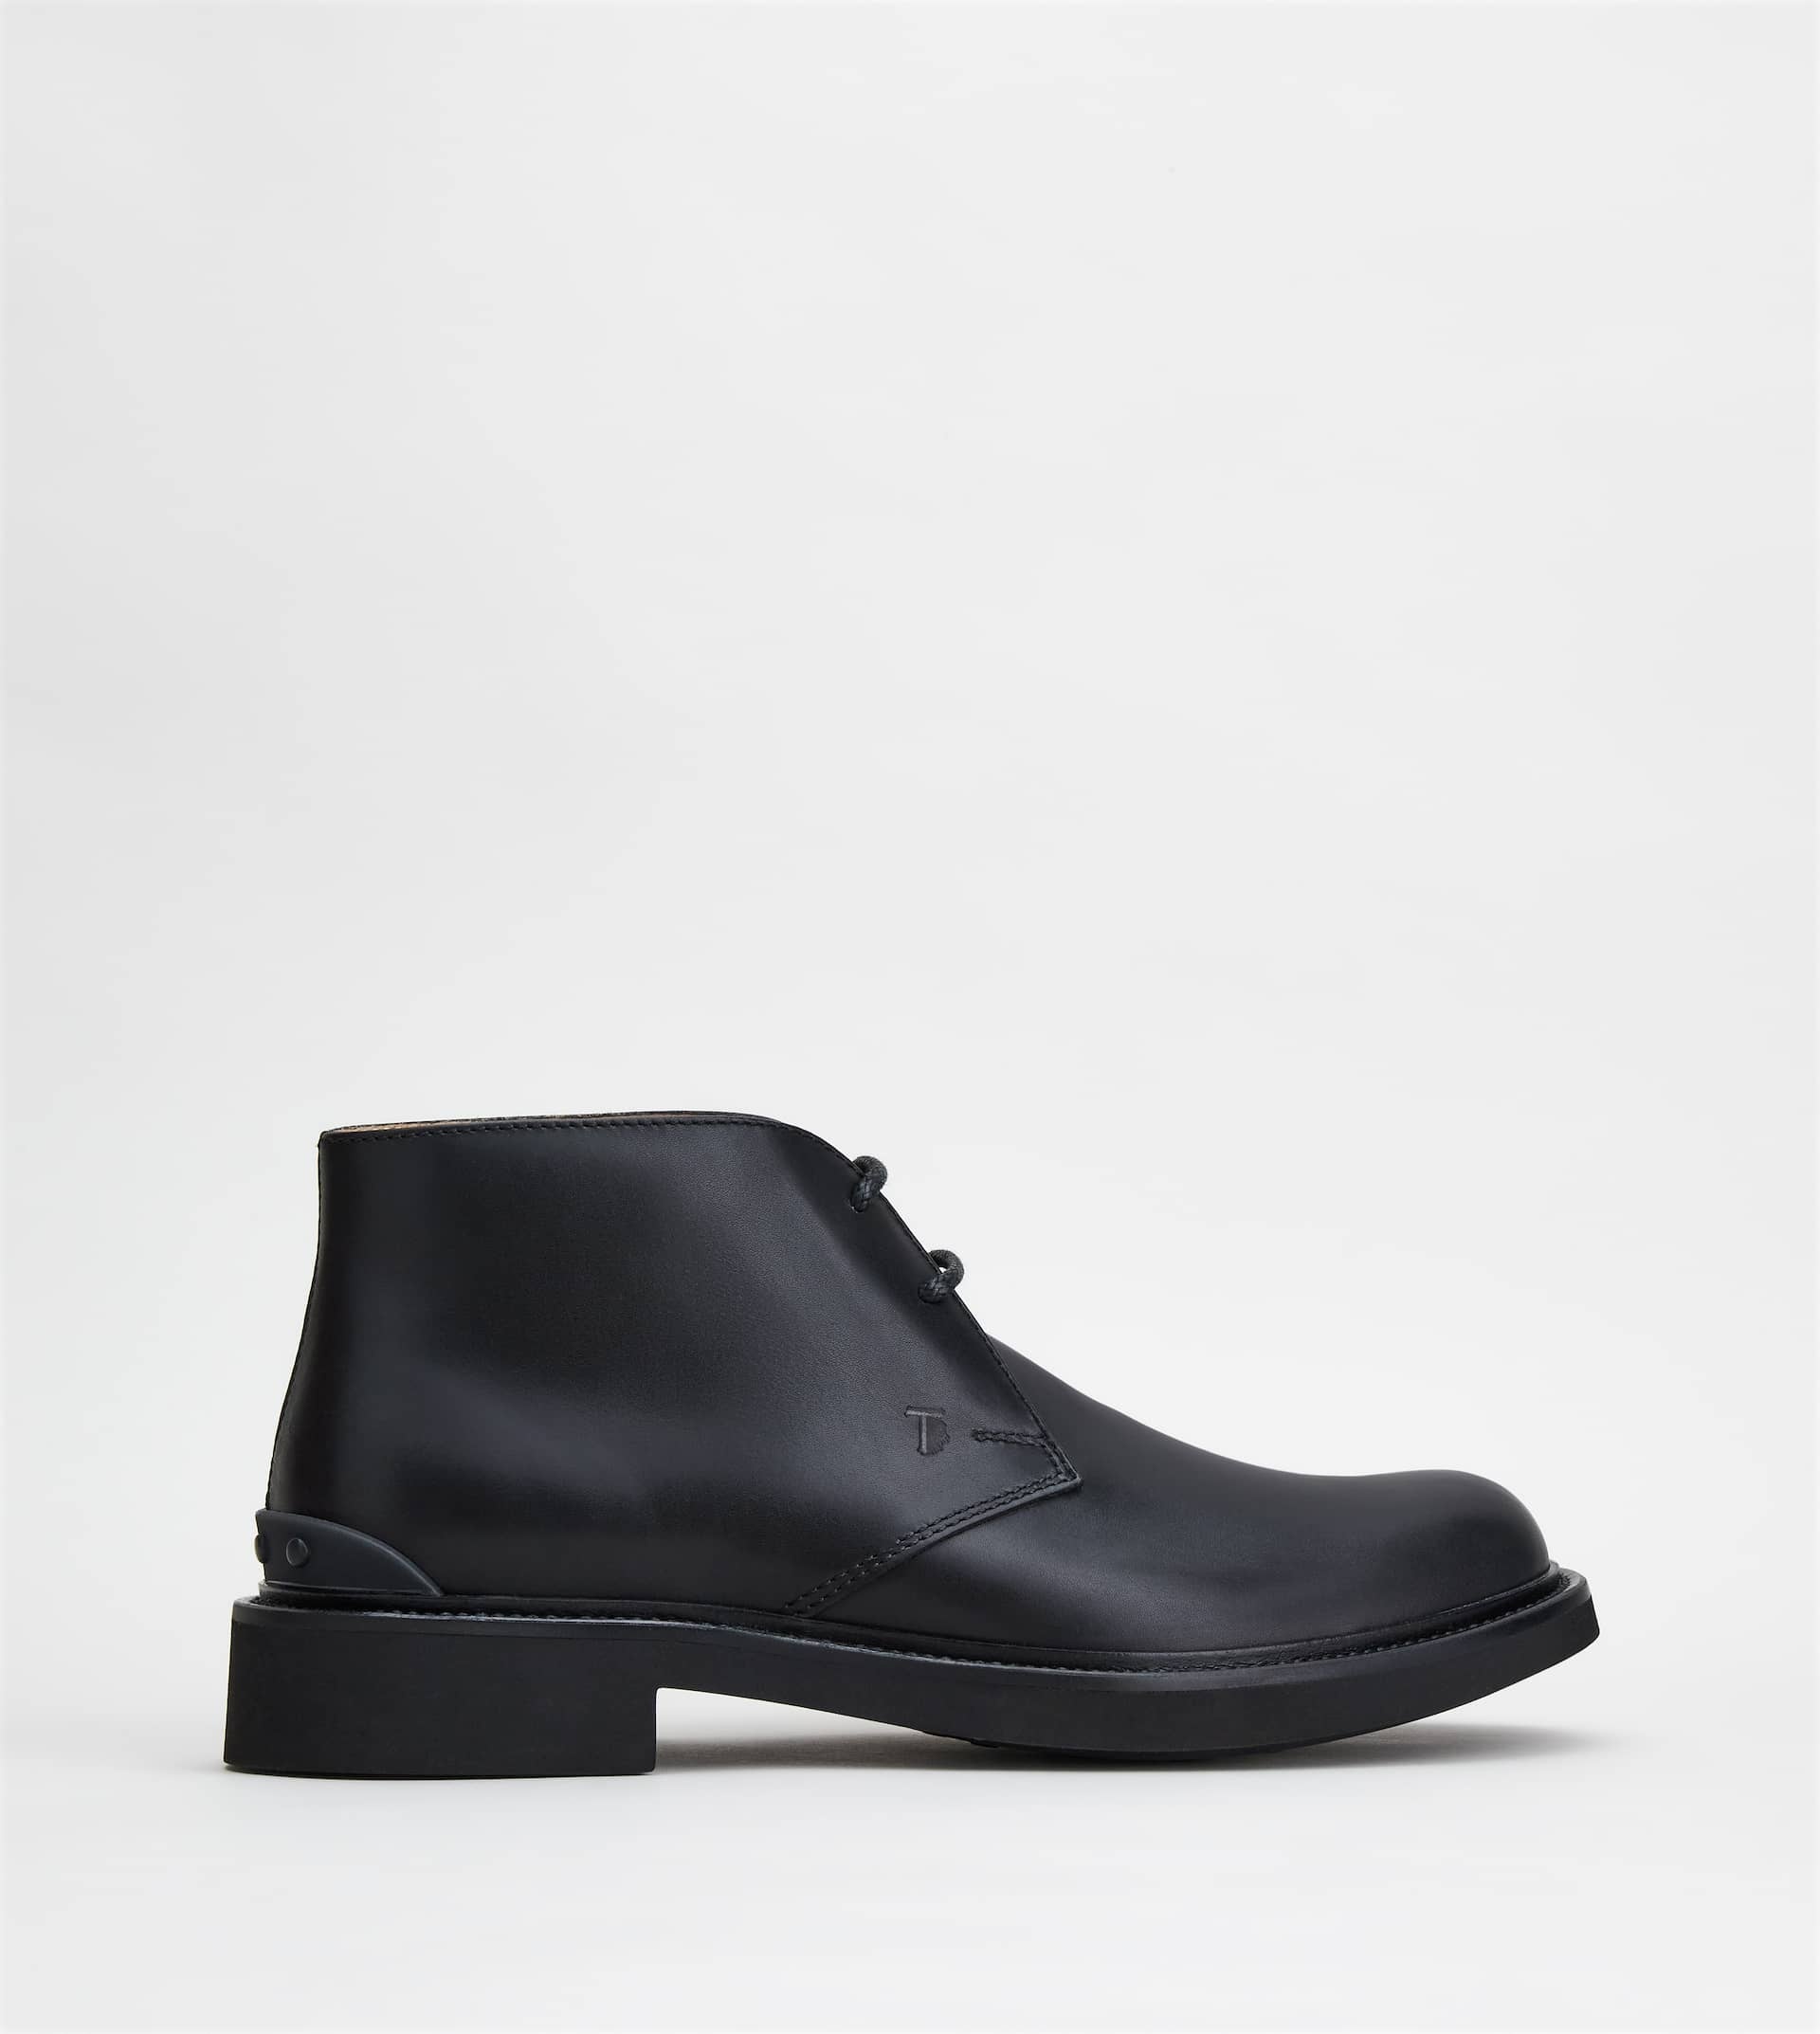 DESERT BOOTS IN LEATHER - BLACK - 1